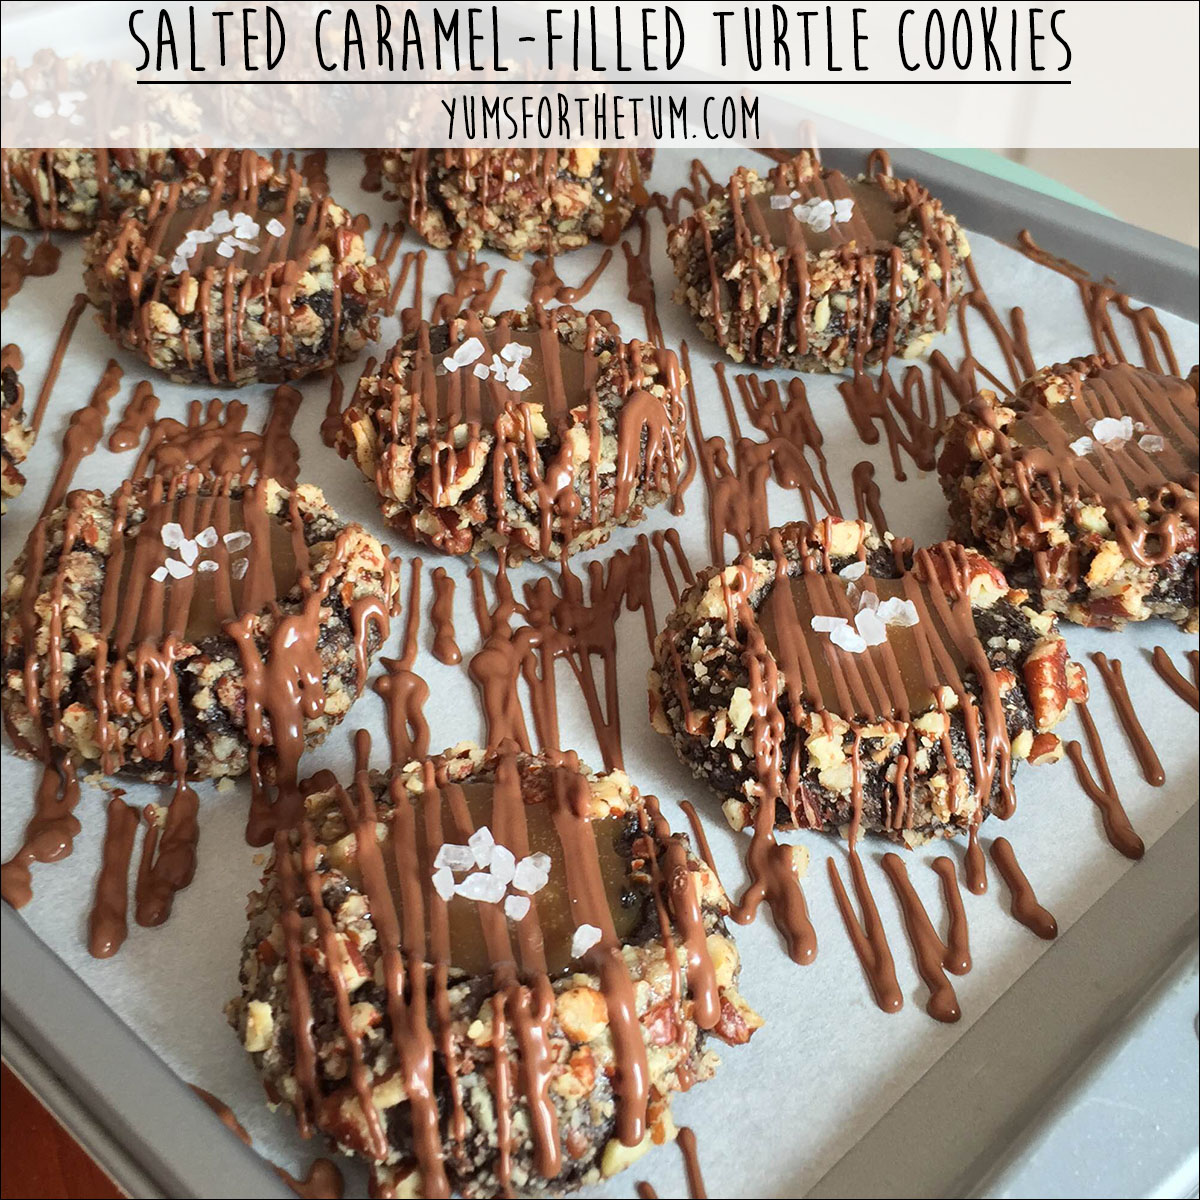 Salted Caramel-Filled Turtle Cookies